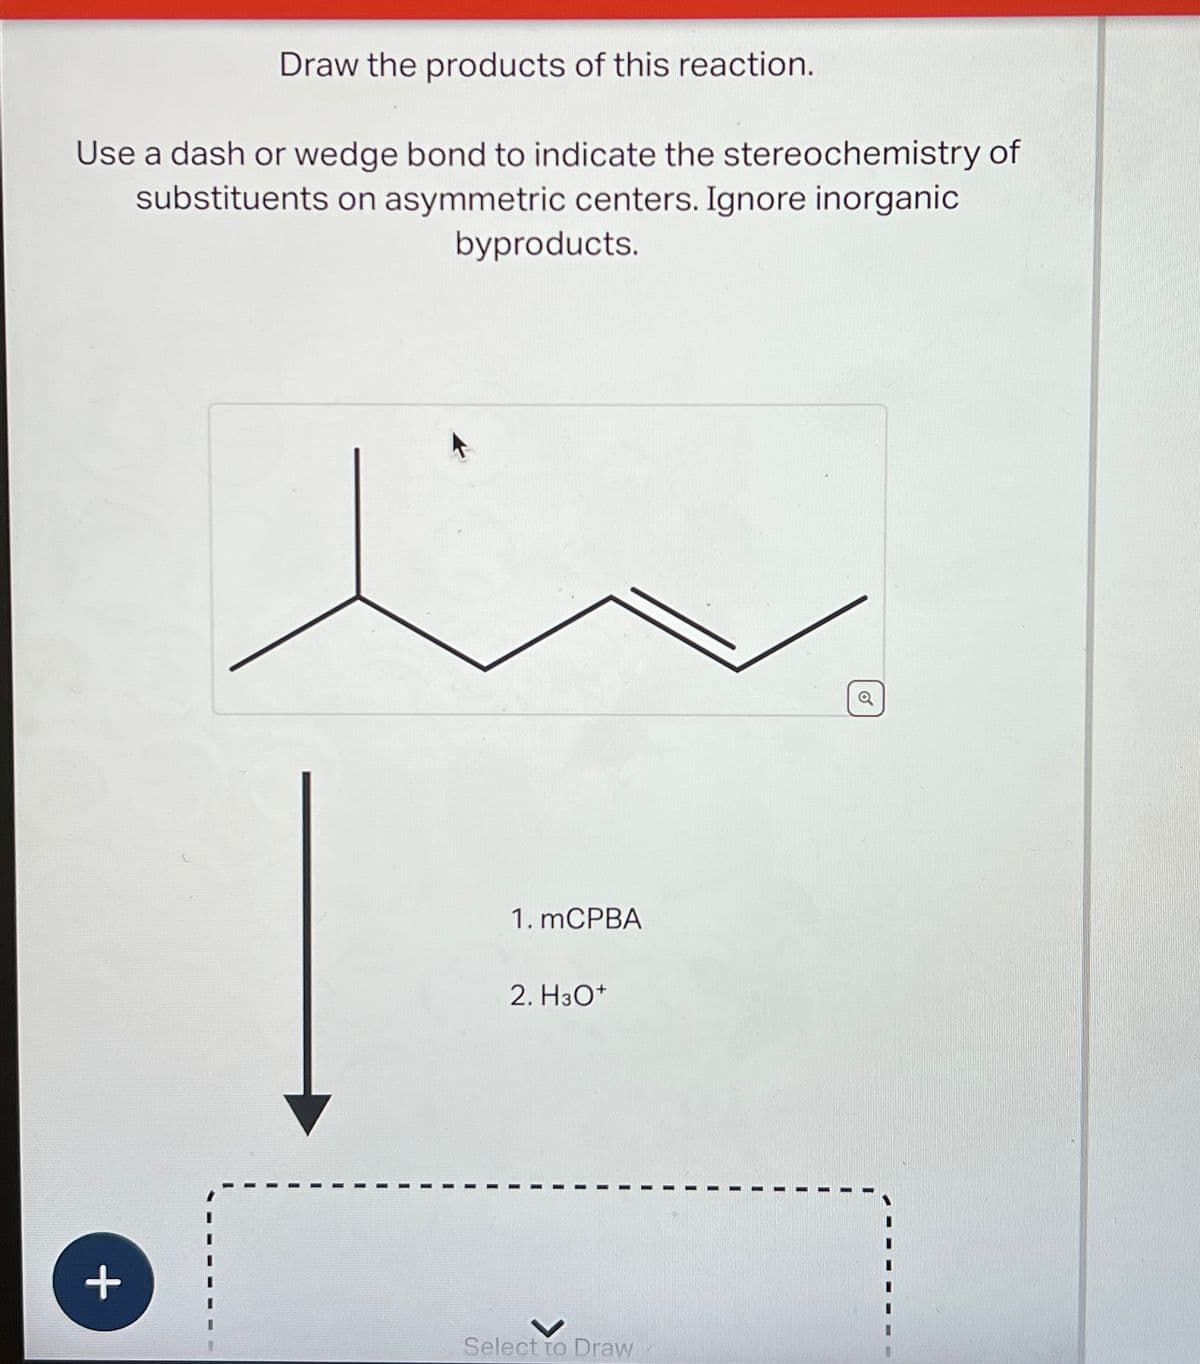 Draw the products of this reaction.
Use a dash or wedge bond to indicate the stereochemistry of
substituents on asymmetric centers. Ignore inorganic
byproducts.
+
1. mCPBA
2. H3O+
Select to Draw
Q